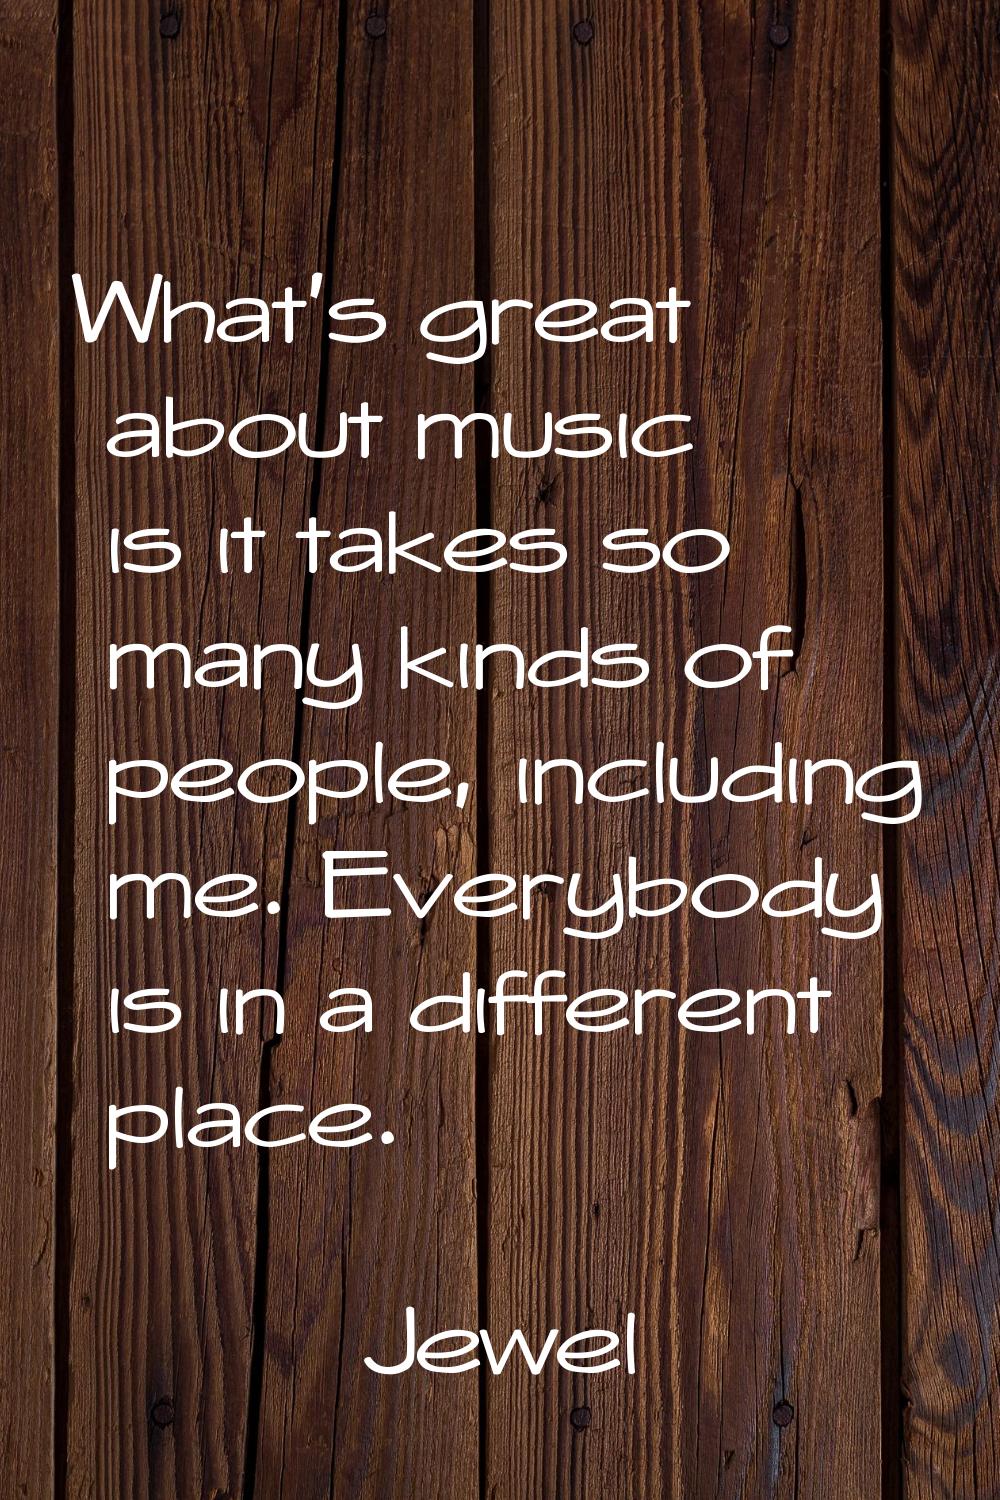 What's great about music is it takes so many kinds of people, including me. Everybody is in a diffe